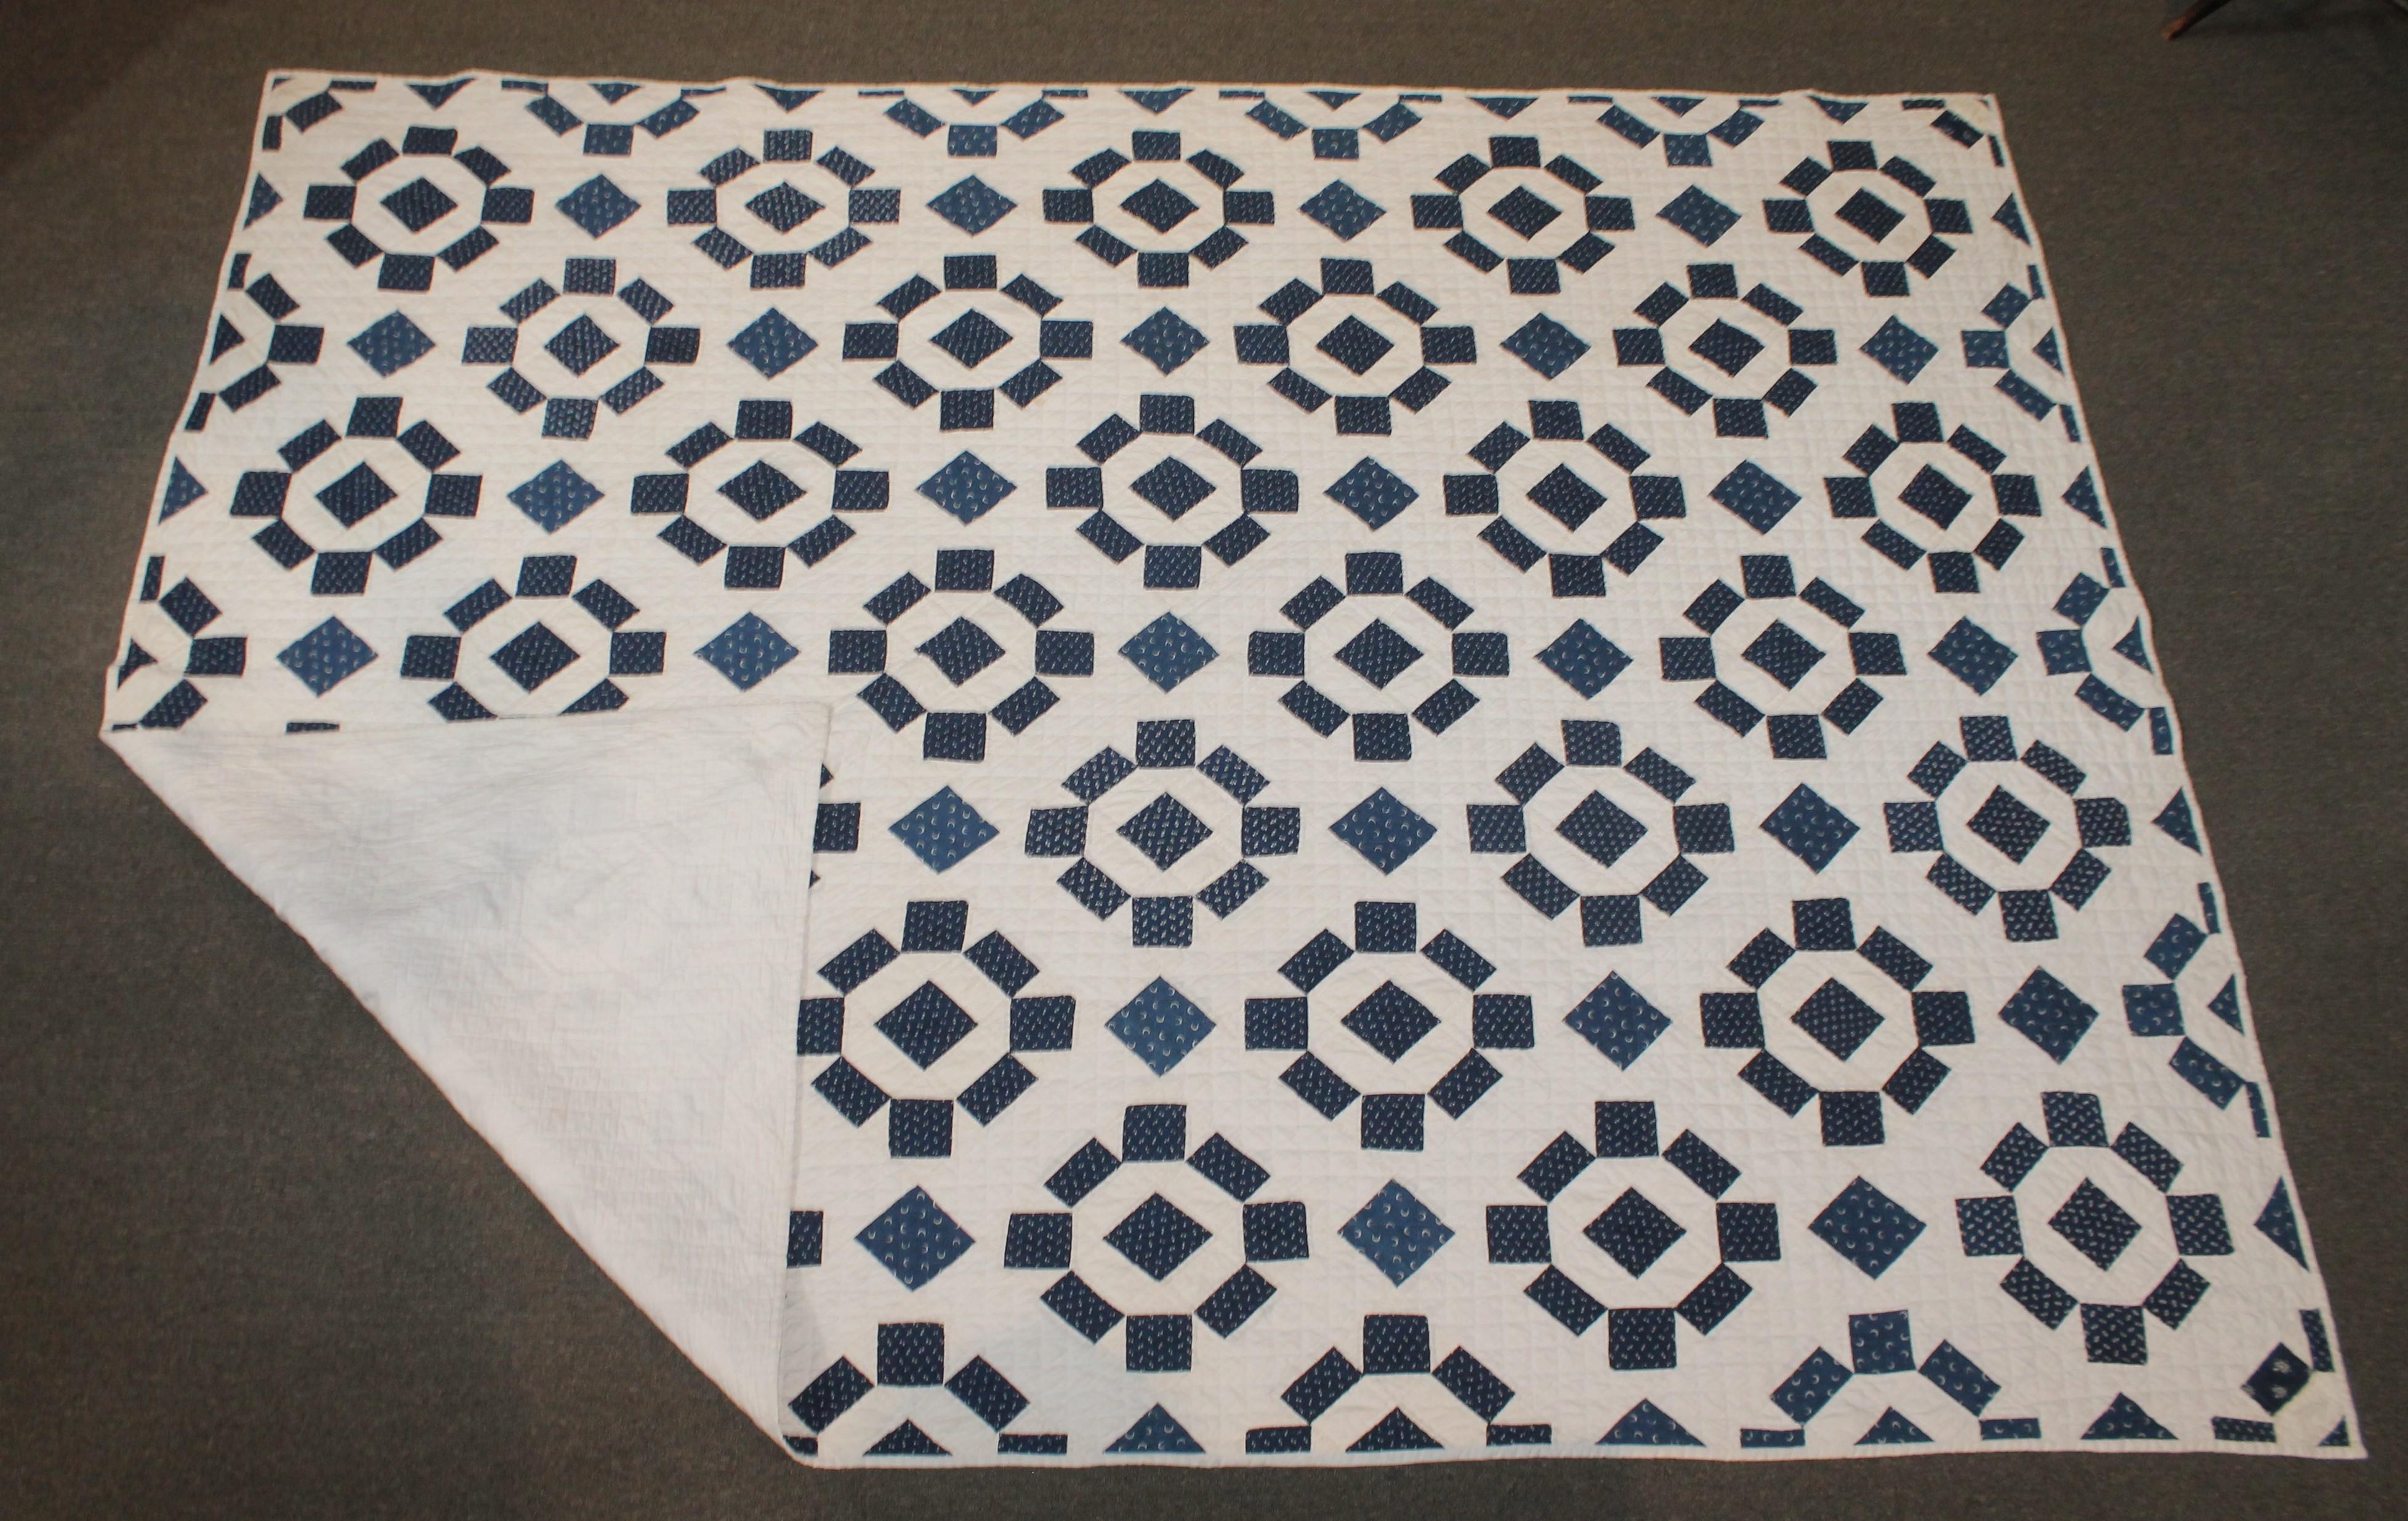 19th century blue and white geometric quilt with very nice quilting and piece work. The condition is very good condition.